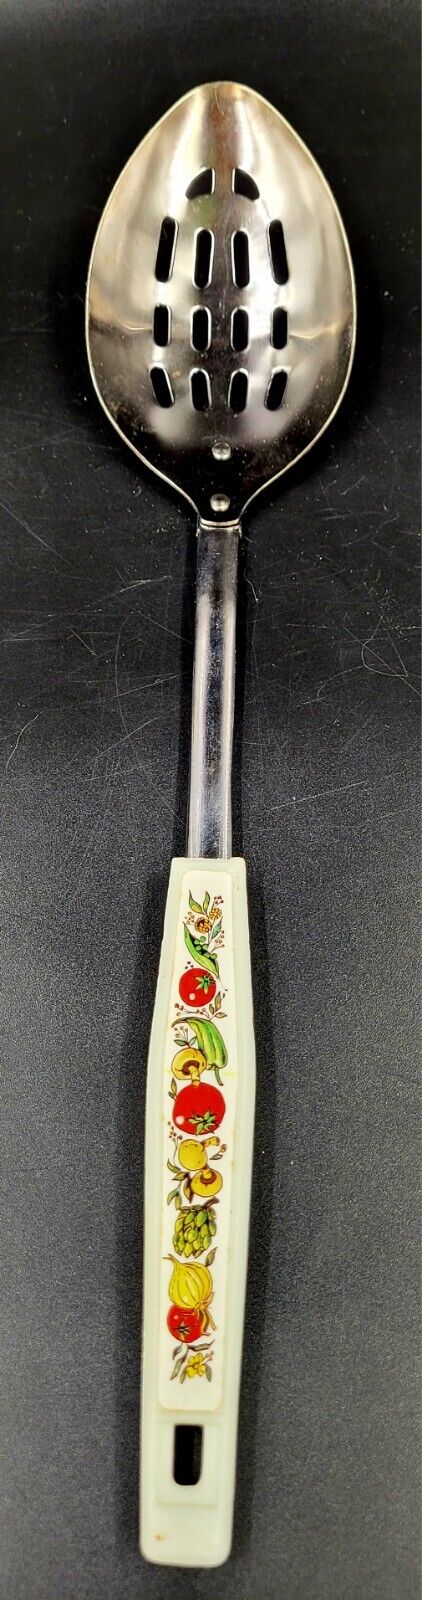 Ekco Slotted Spoon Utensil Spice Of Life Vintage Chromium Plated Made  in U.S.A.